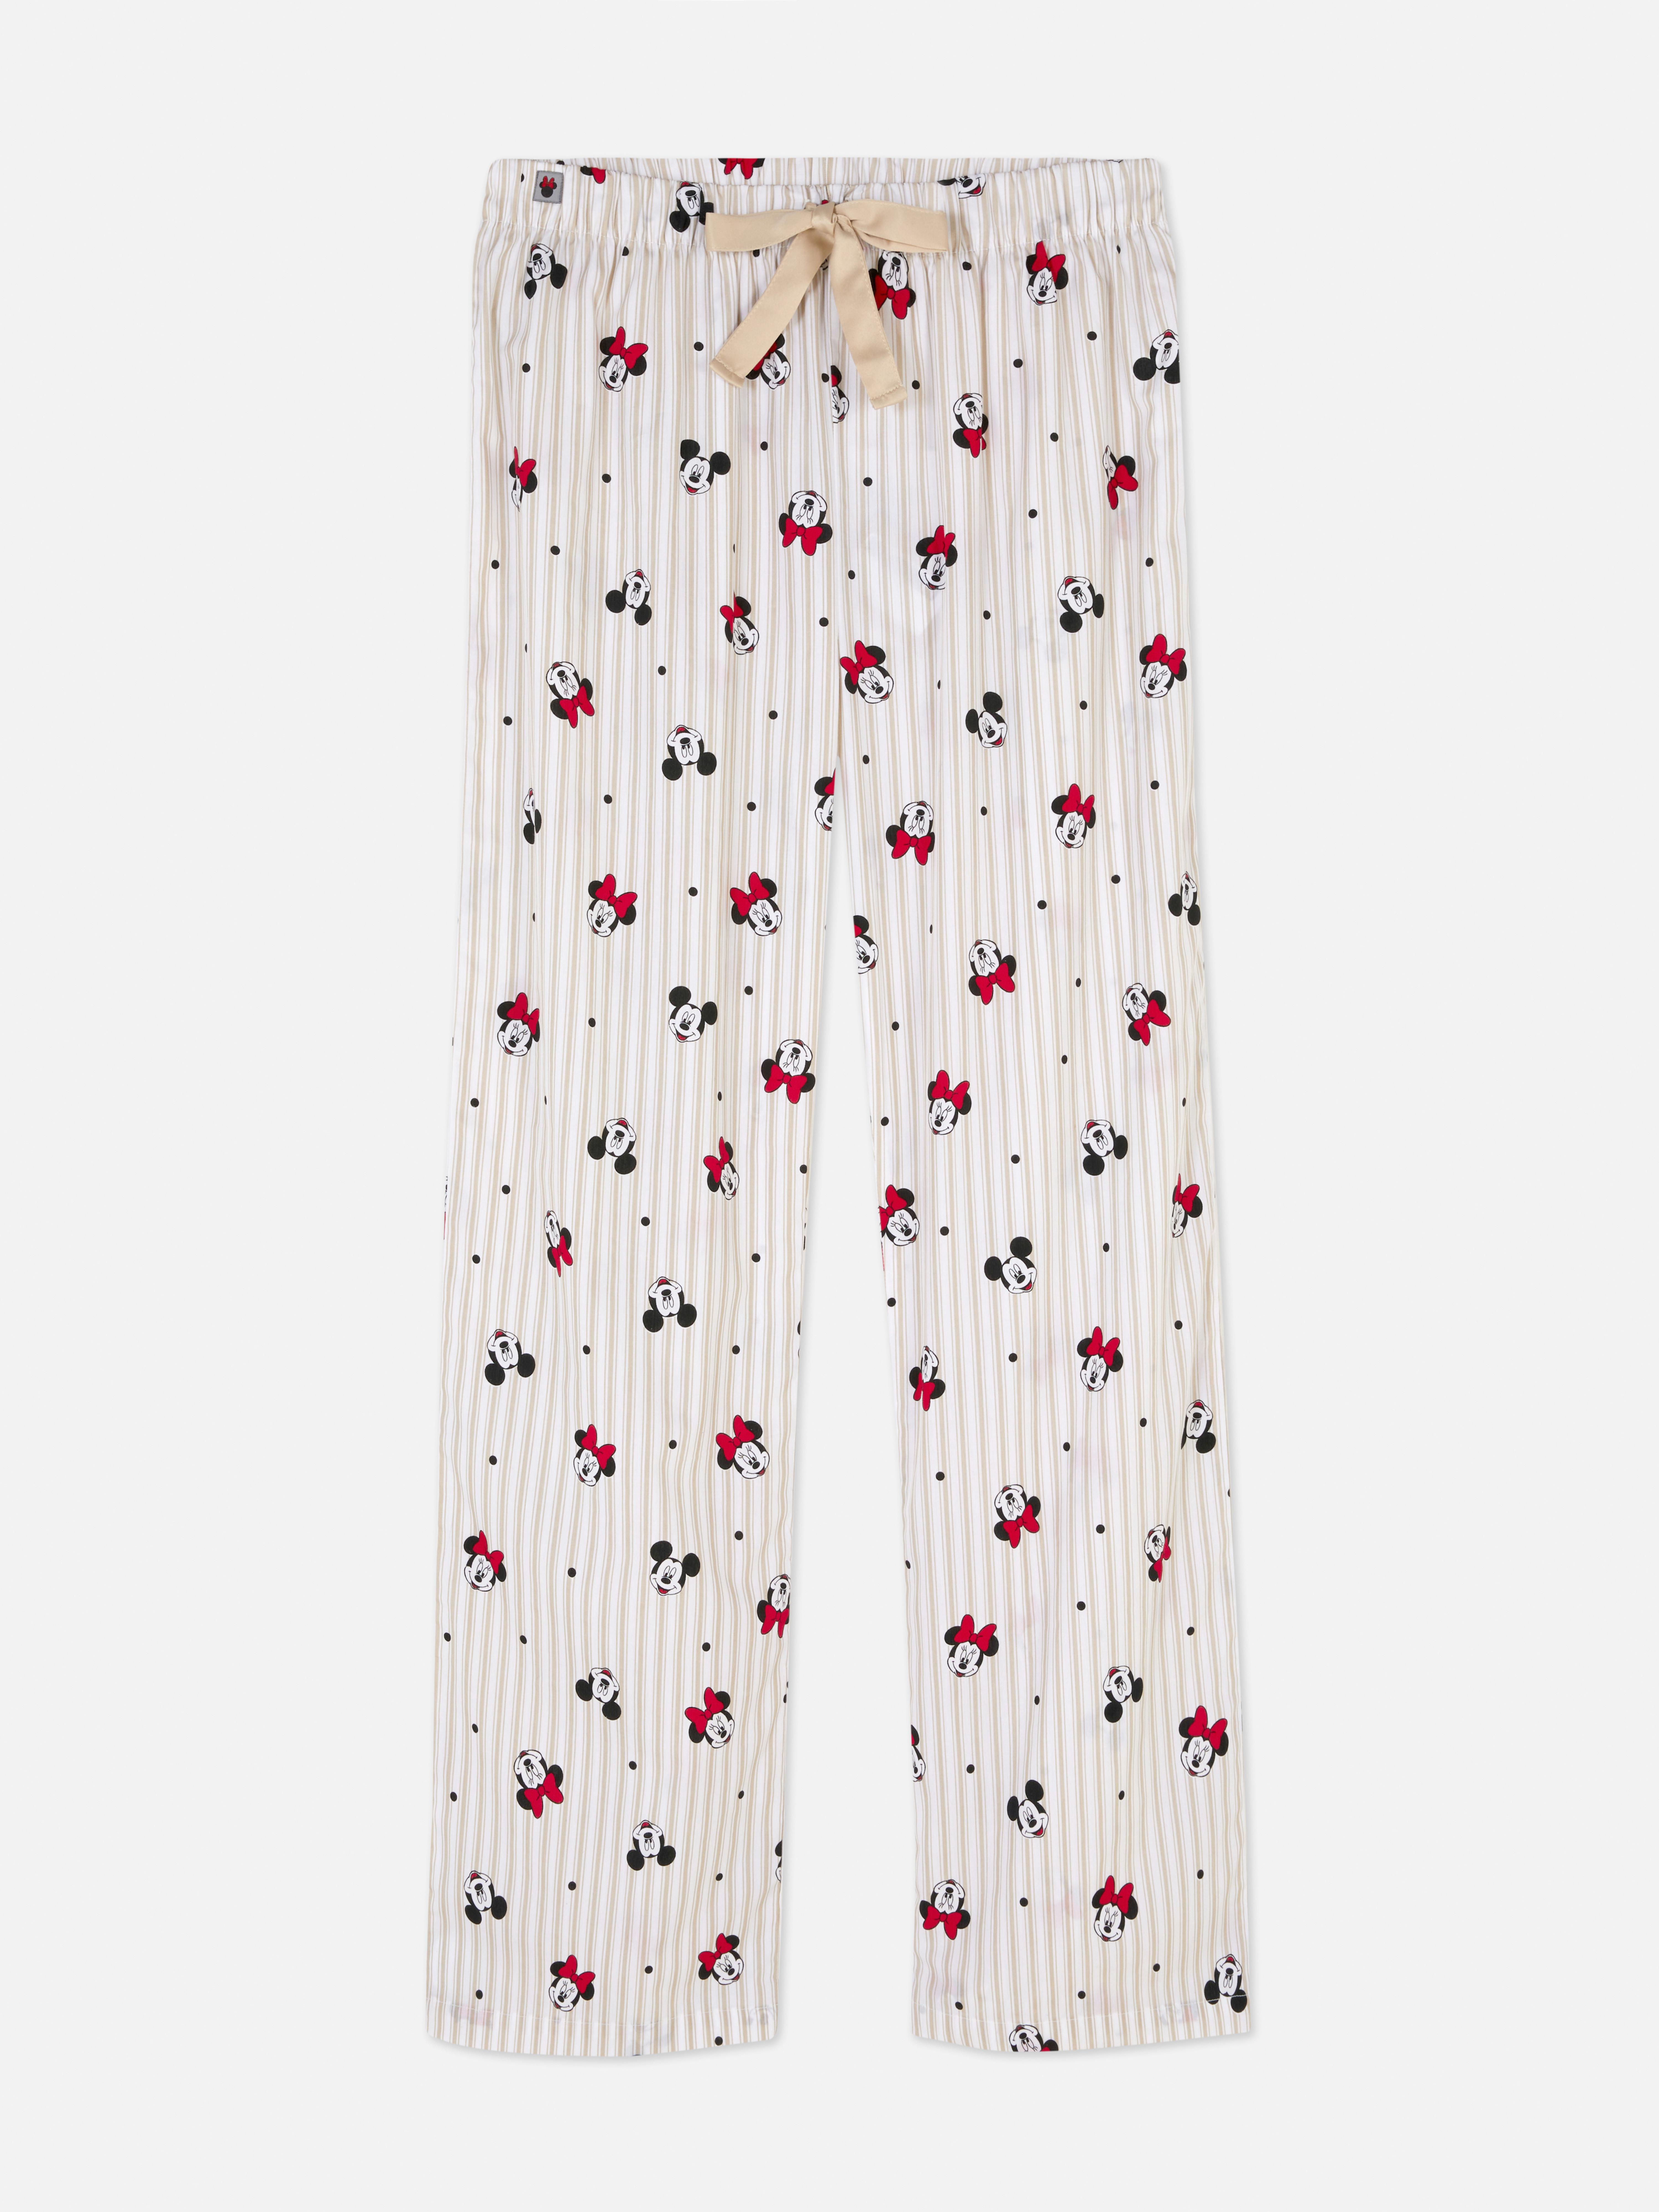 Disney’s Mickey Mouse and Minnie Mouse Pajama Bottoms